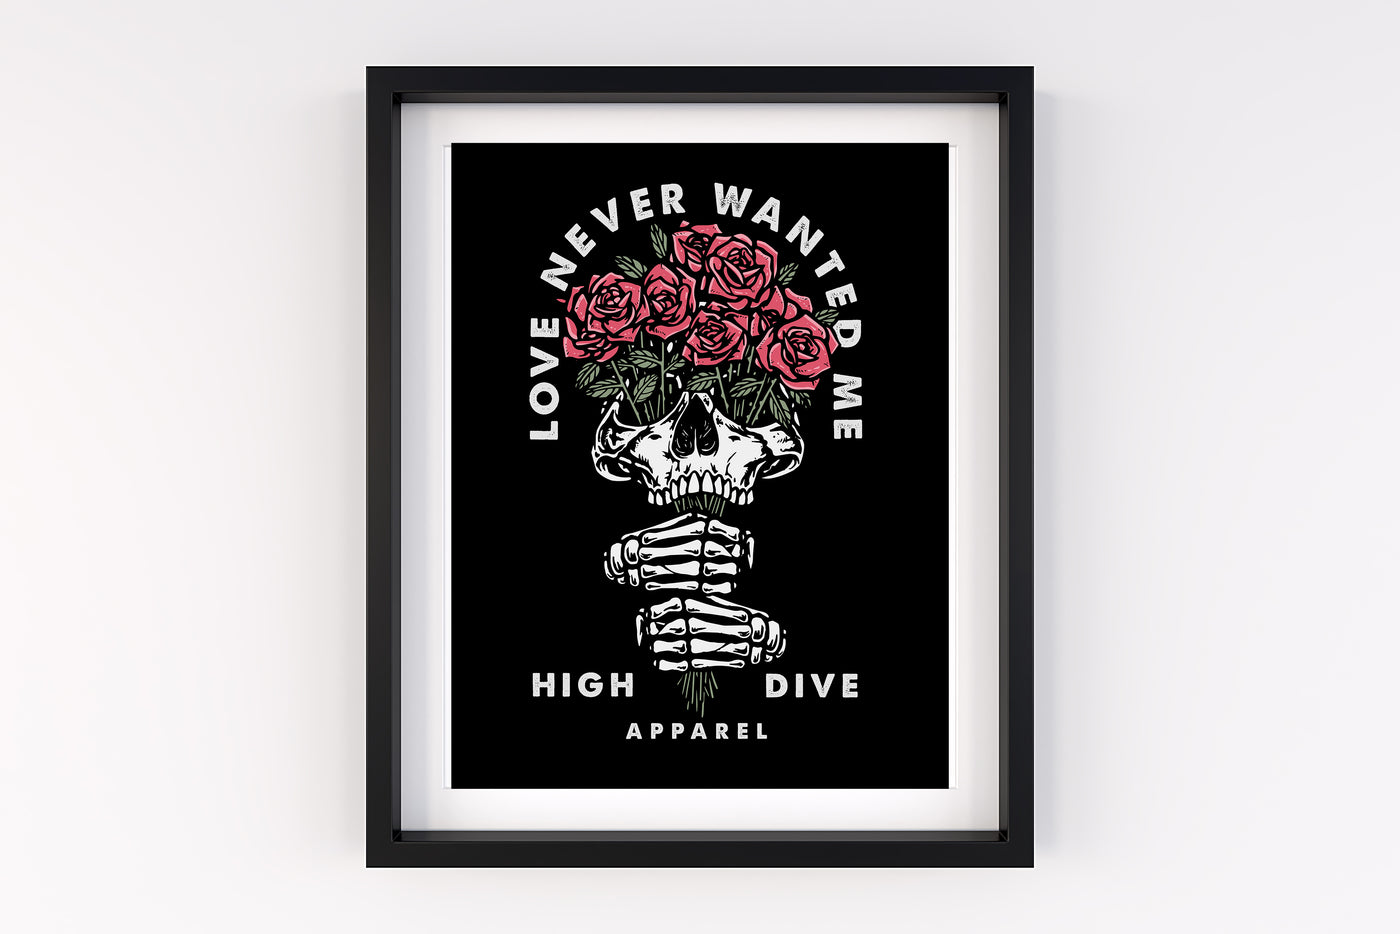 Love Never Wanted me A4 Print